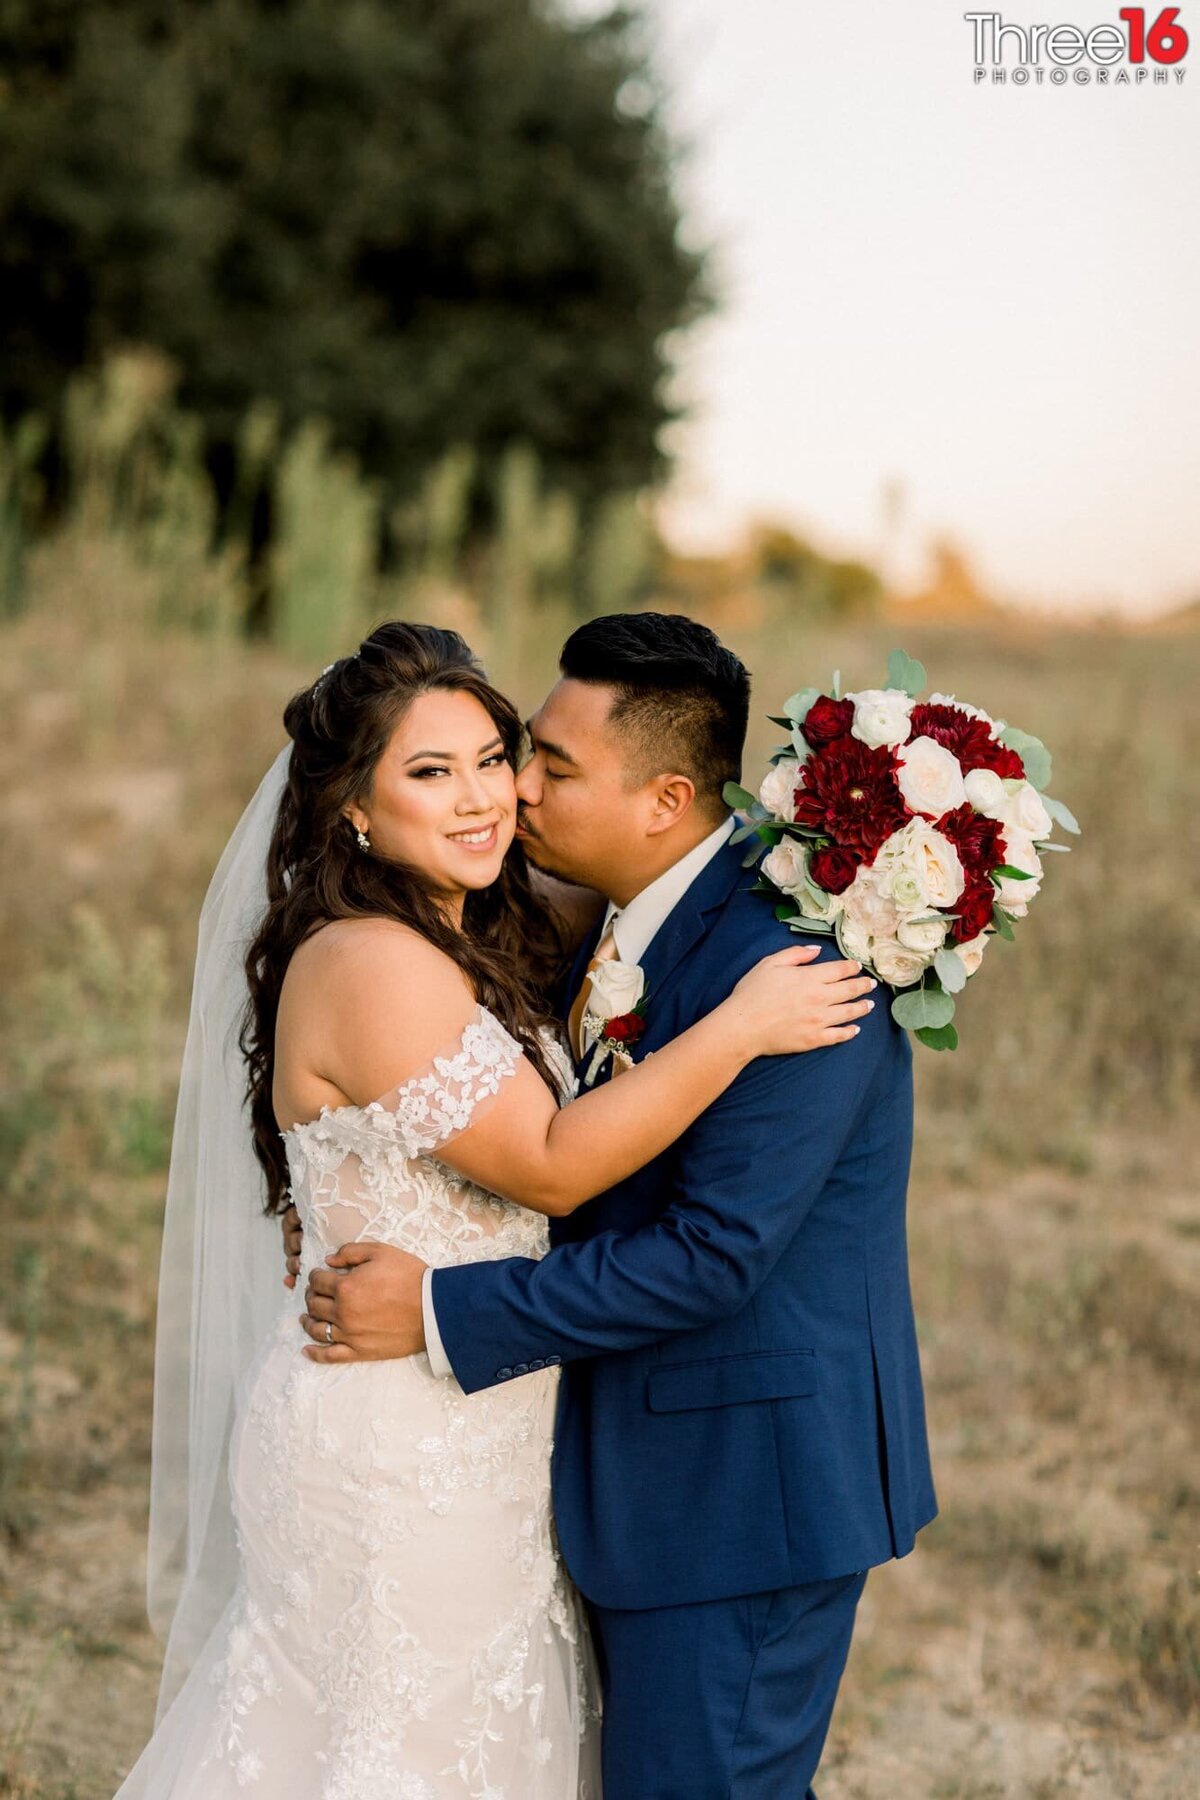 Groom kisses his Bride on the cheek as they embrace